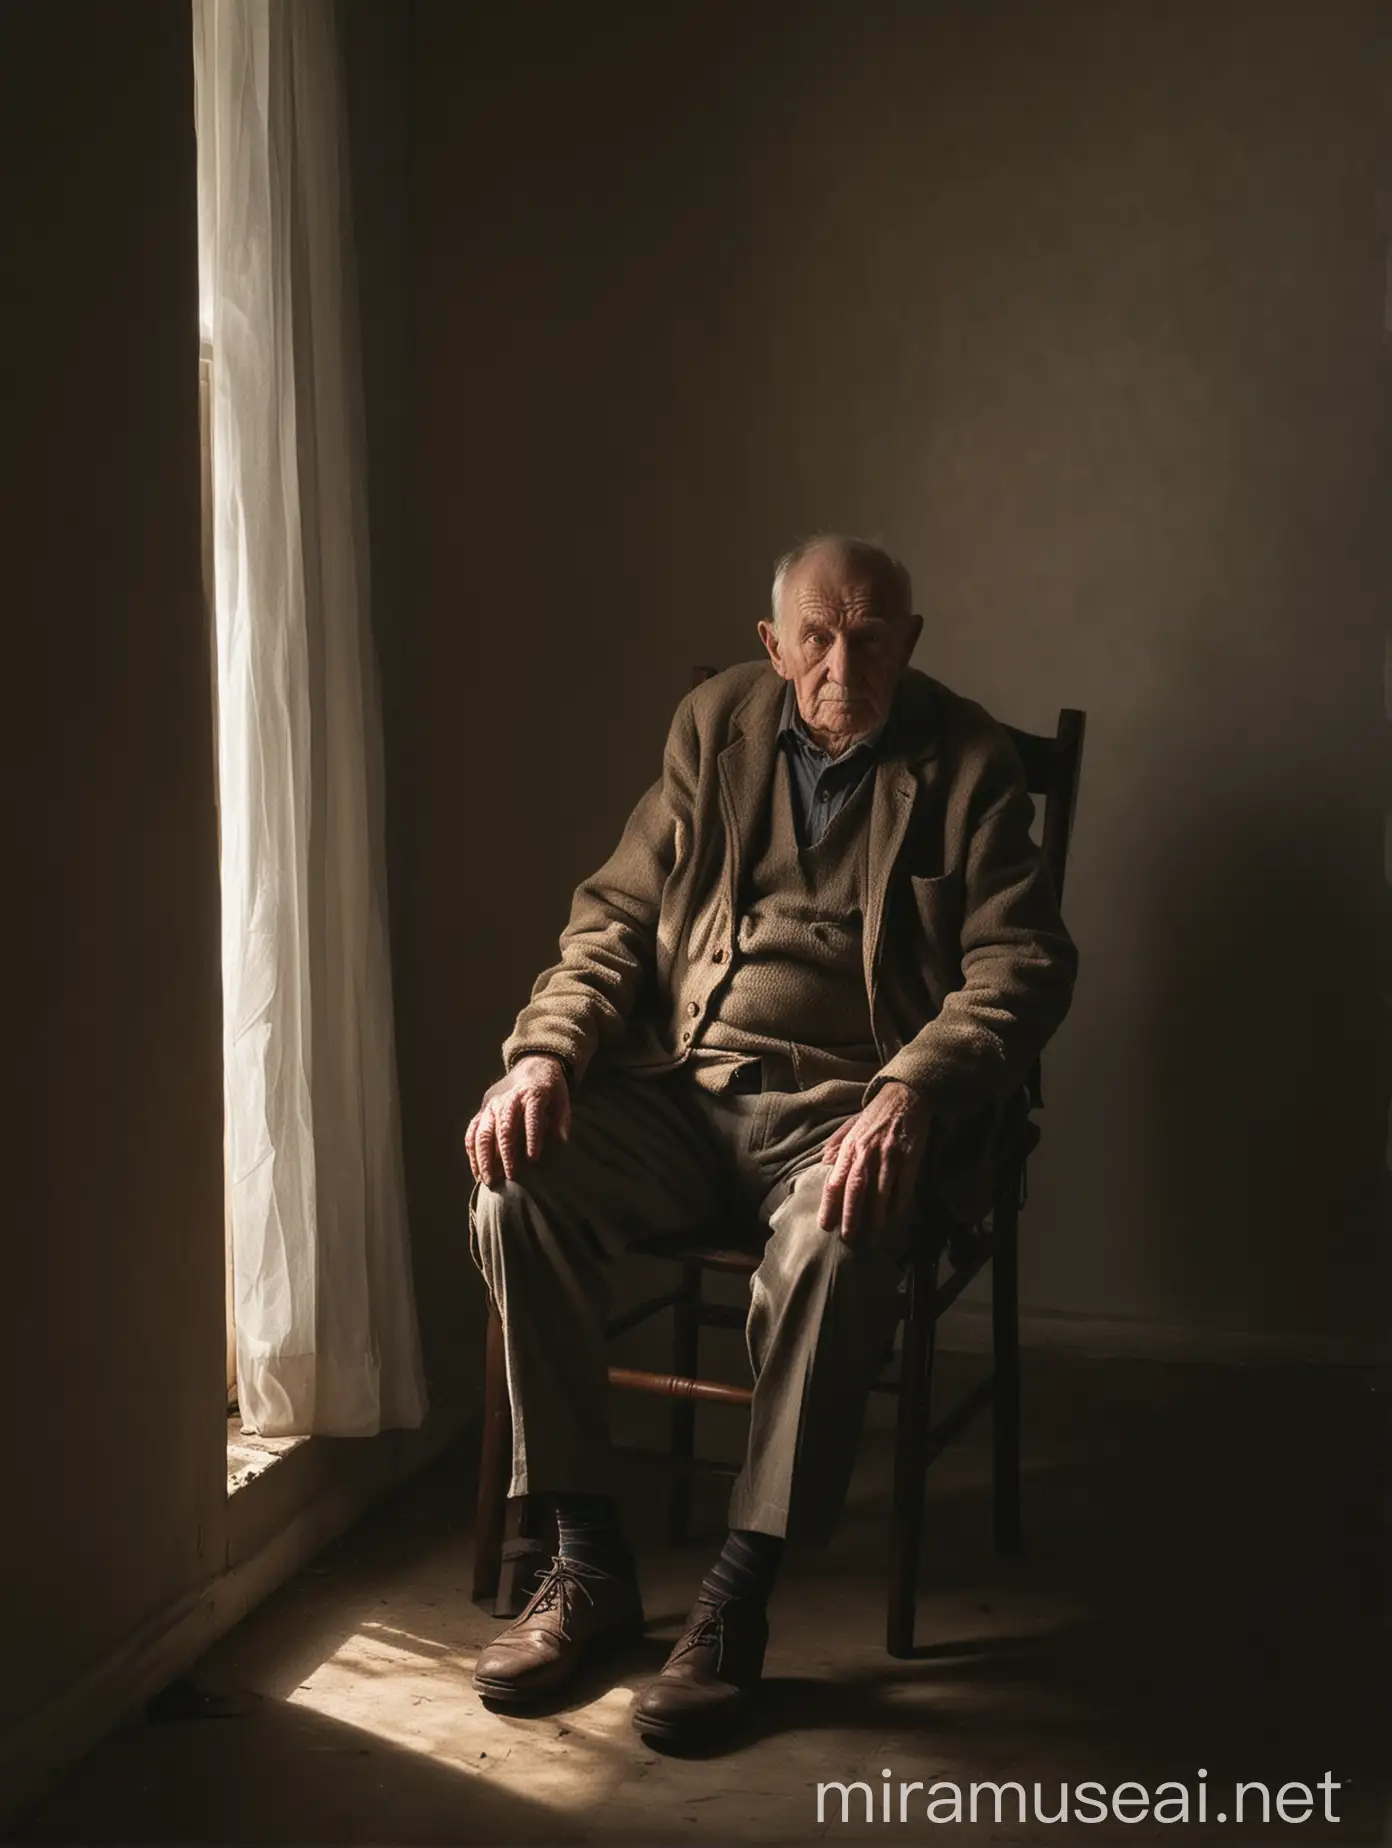 Solitary Elderly Man Contemplating by a Window in Dim Light